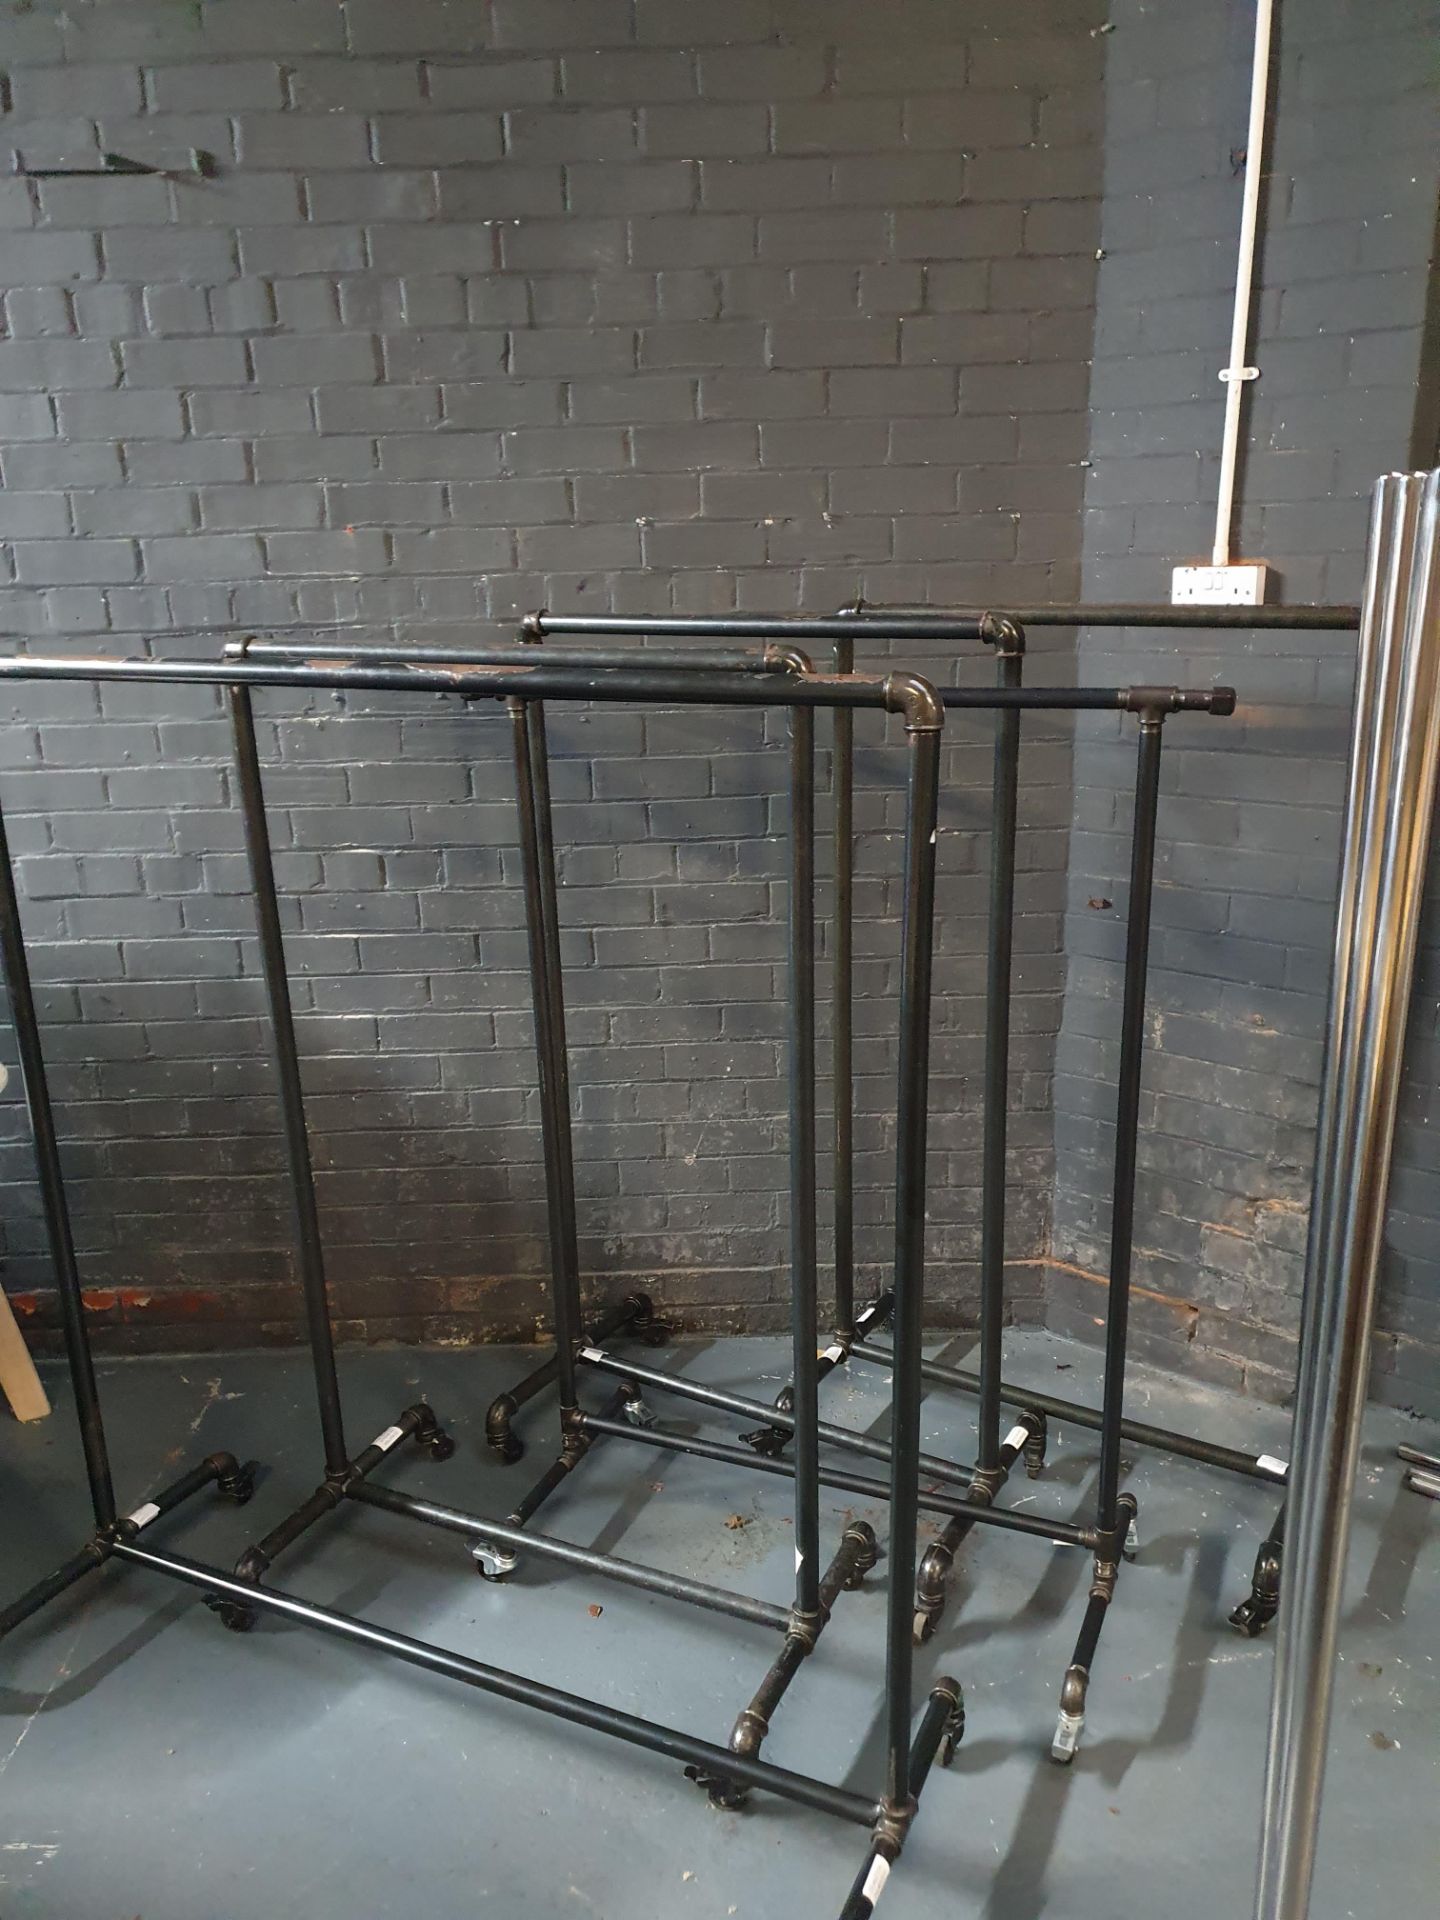 Industrial Style Clothes Rails x5